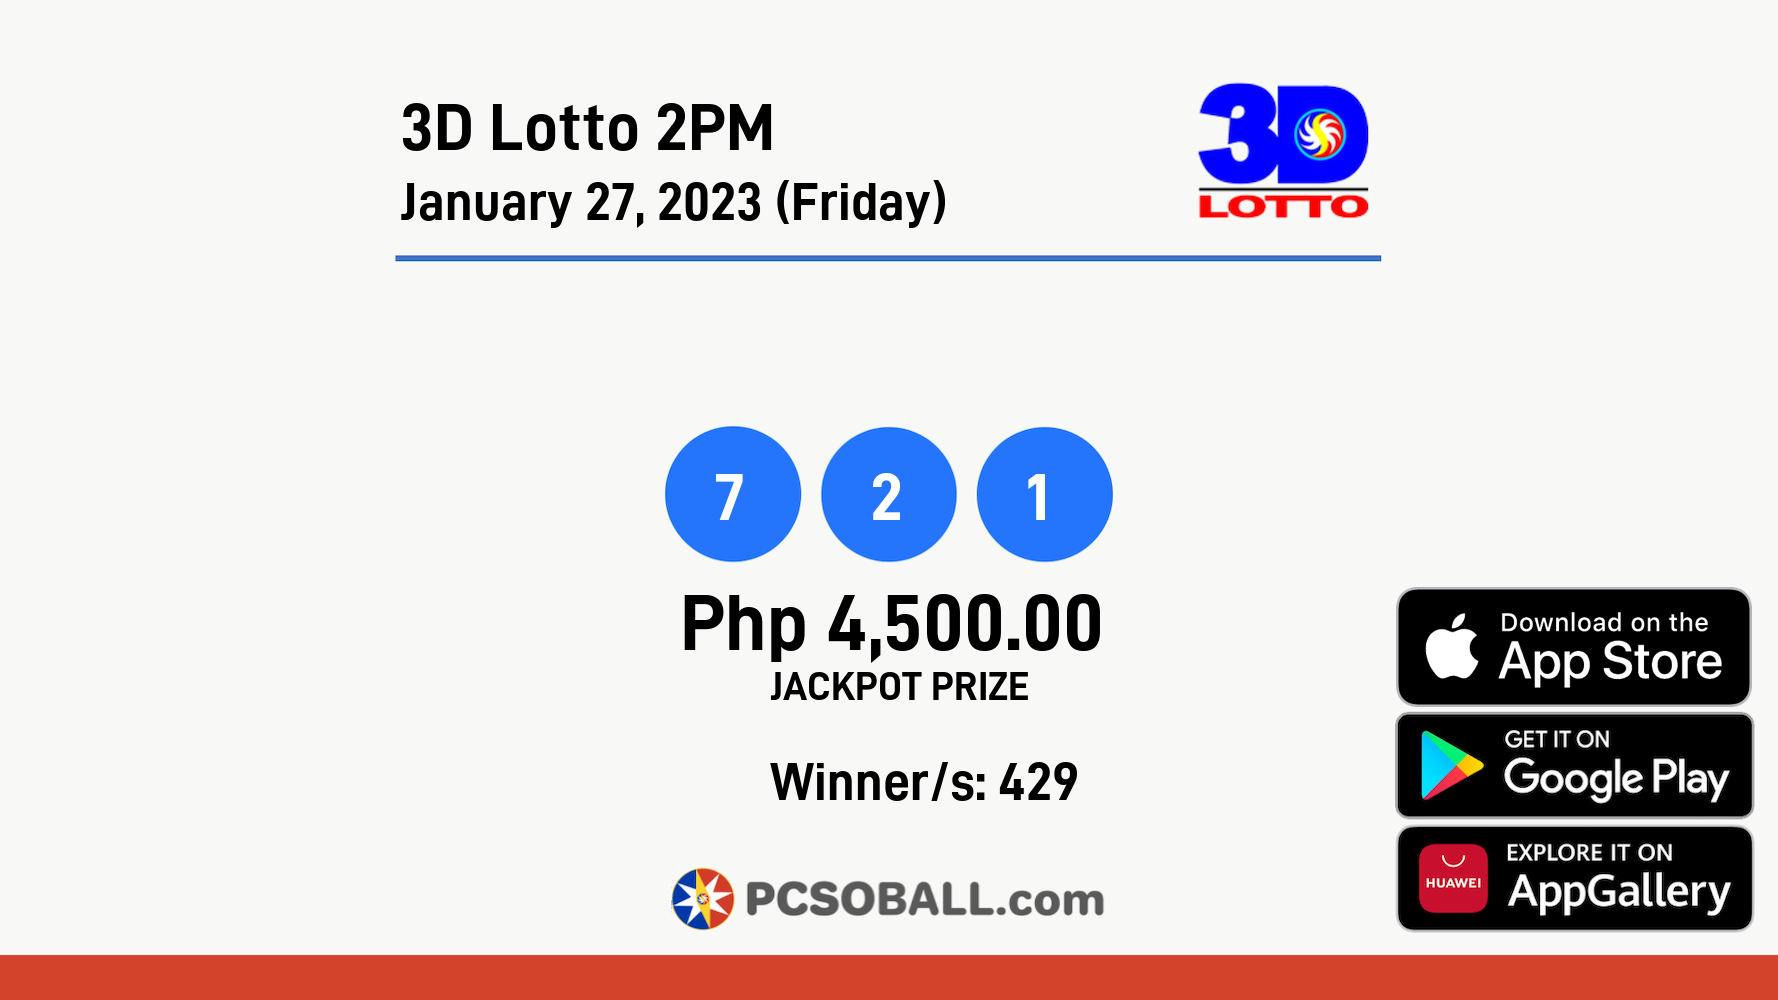 3D Lotto 2PM January 27, 2023 (Friday) Result